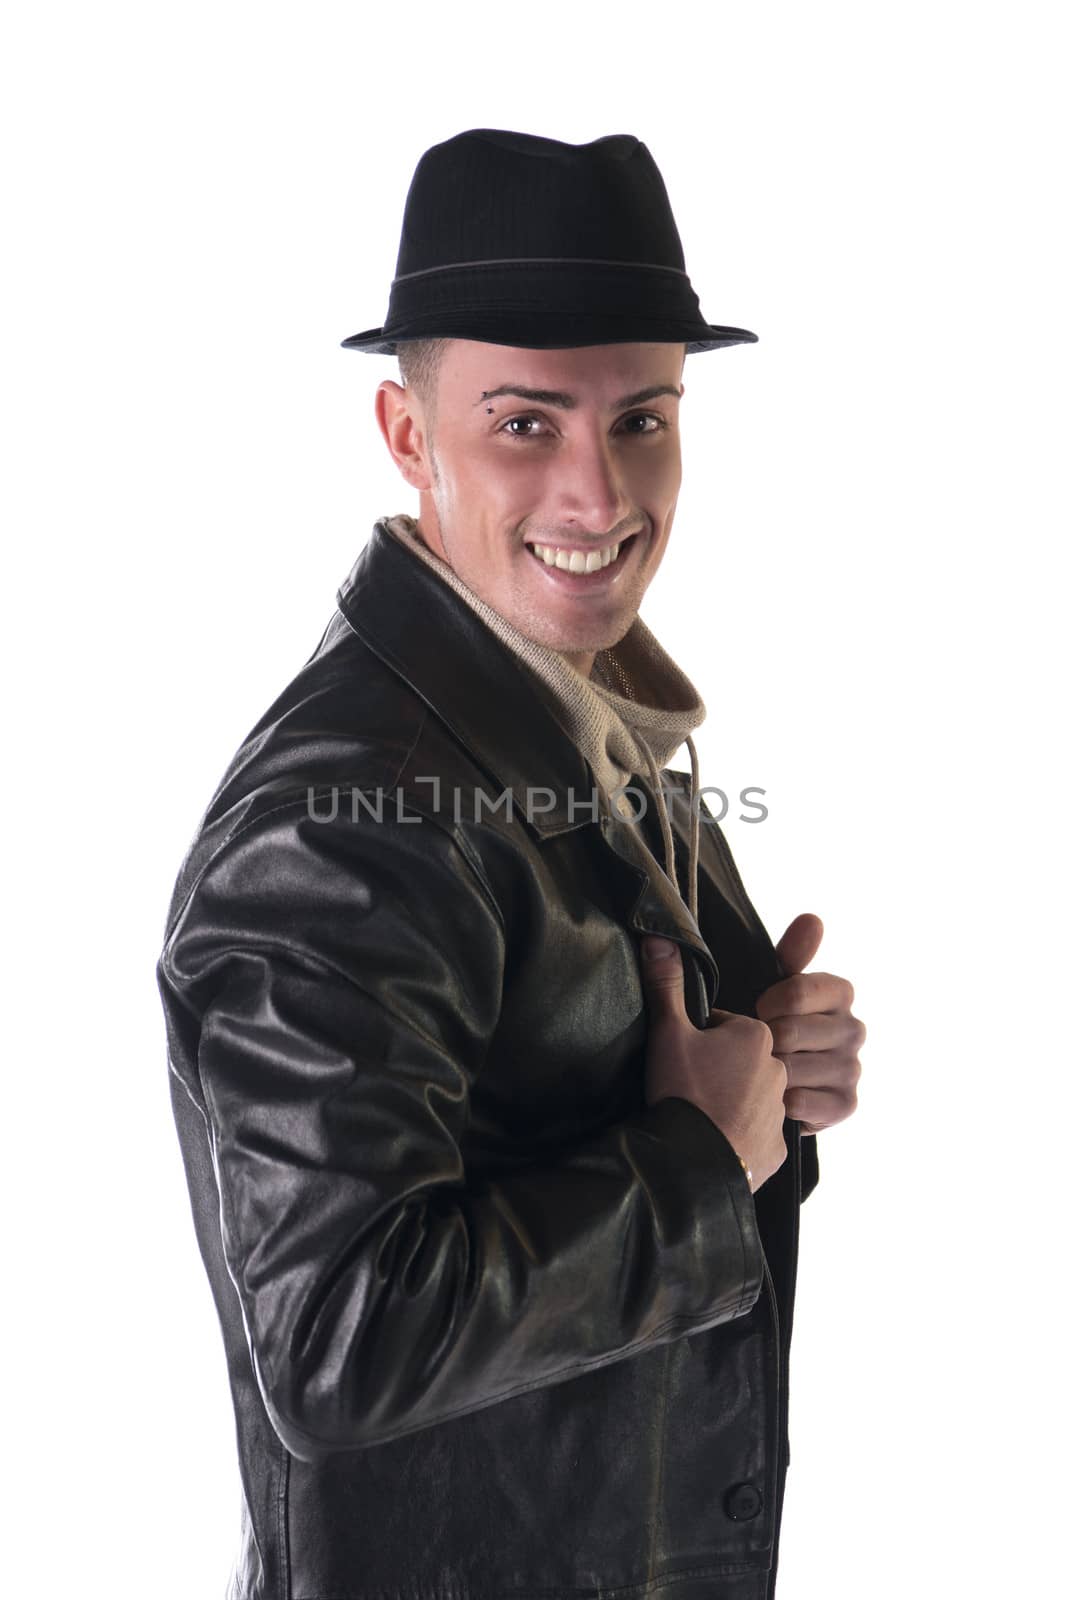 Smiling young man with fedora hat and leather coat by artofphoto